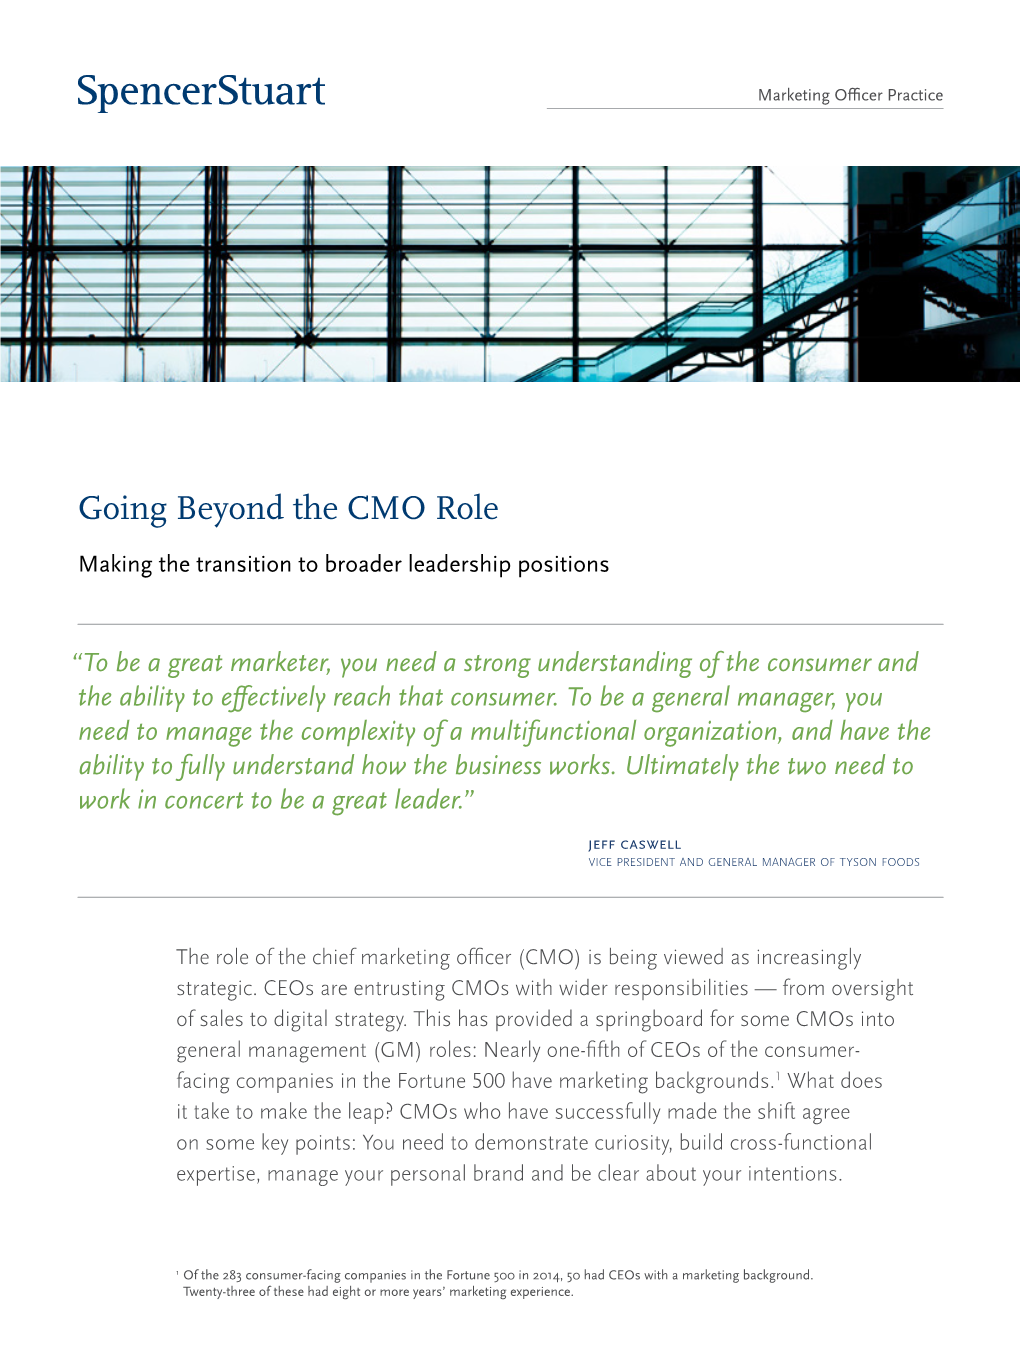 Going Beyond the CMO Role